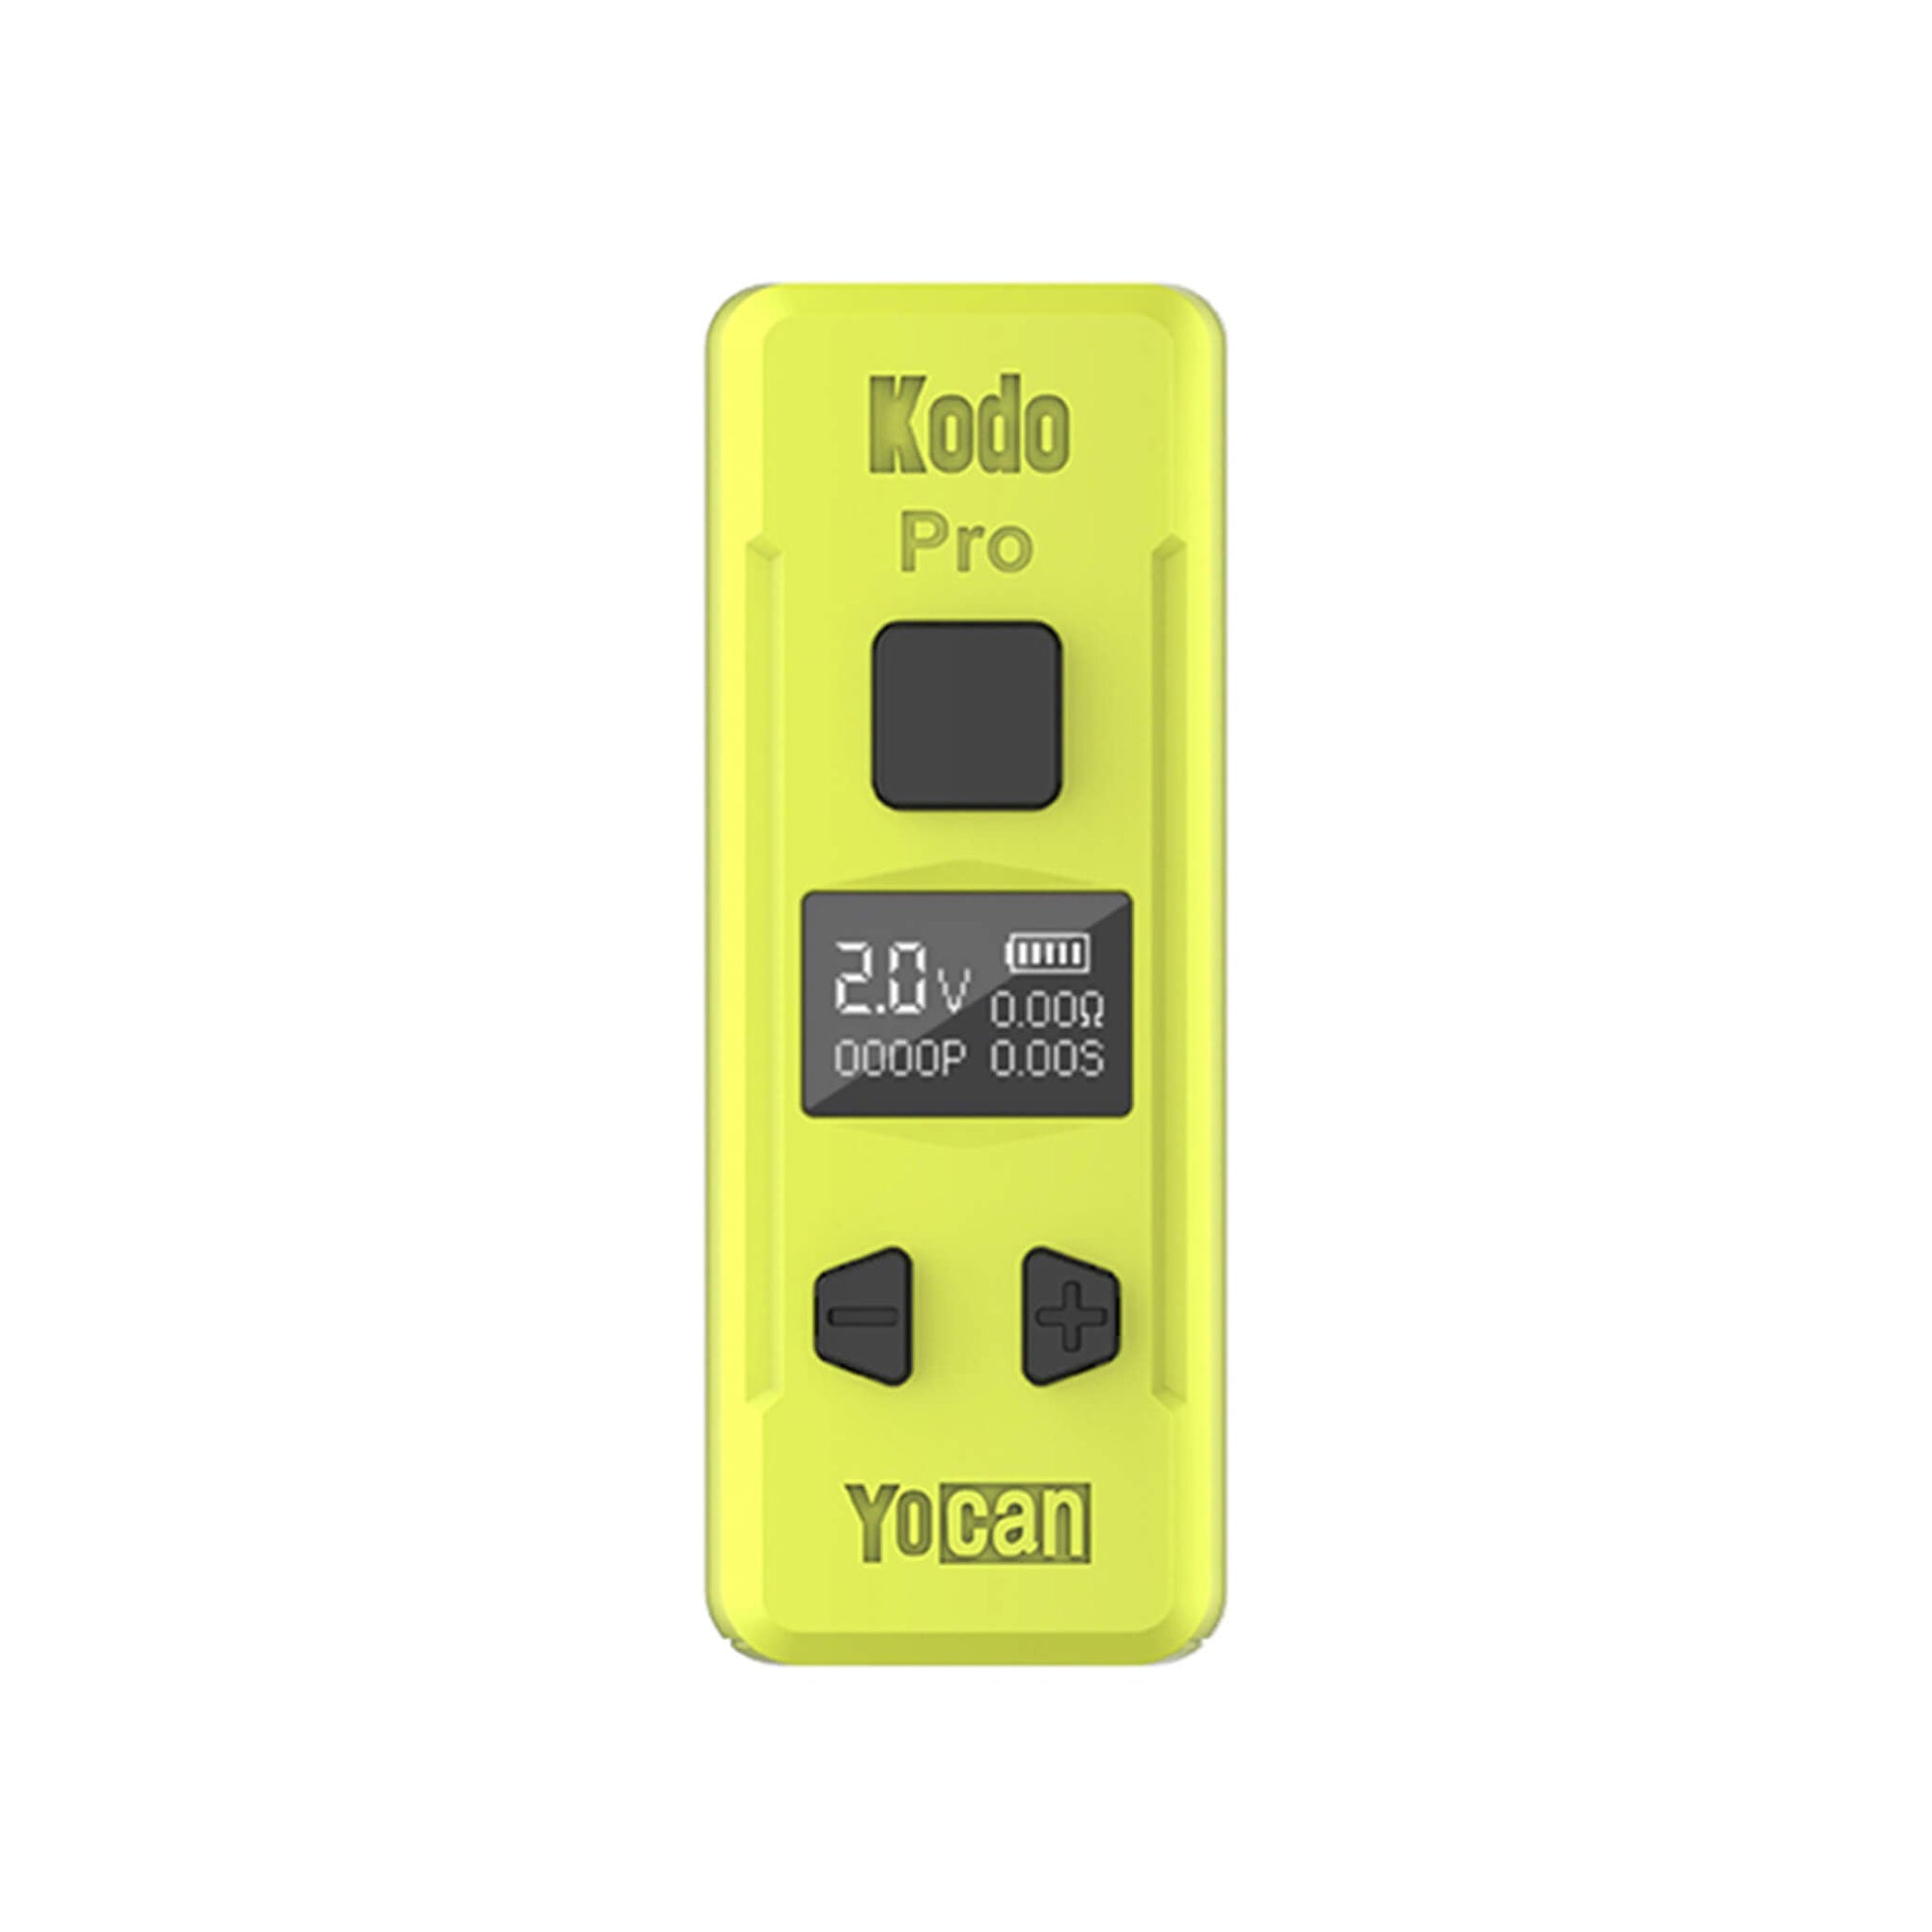 Yocan Kodo Pro 510 Thread Battery | Yellow Color View | the dabbing specialists